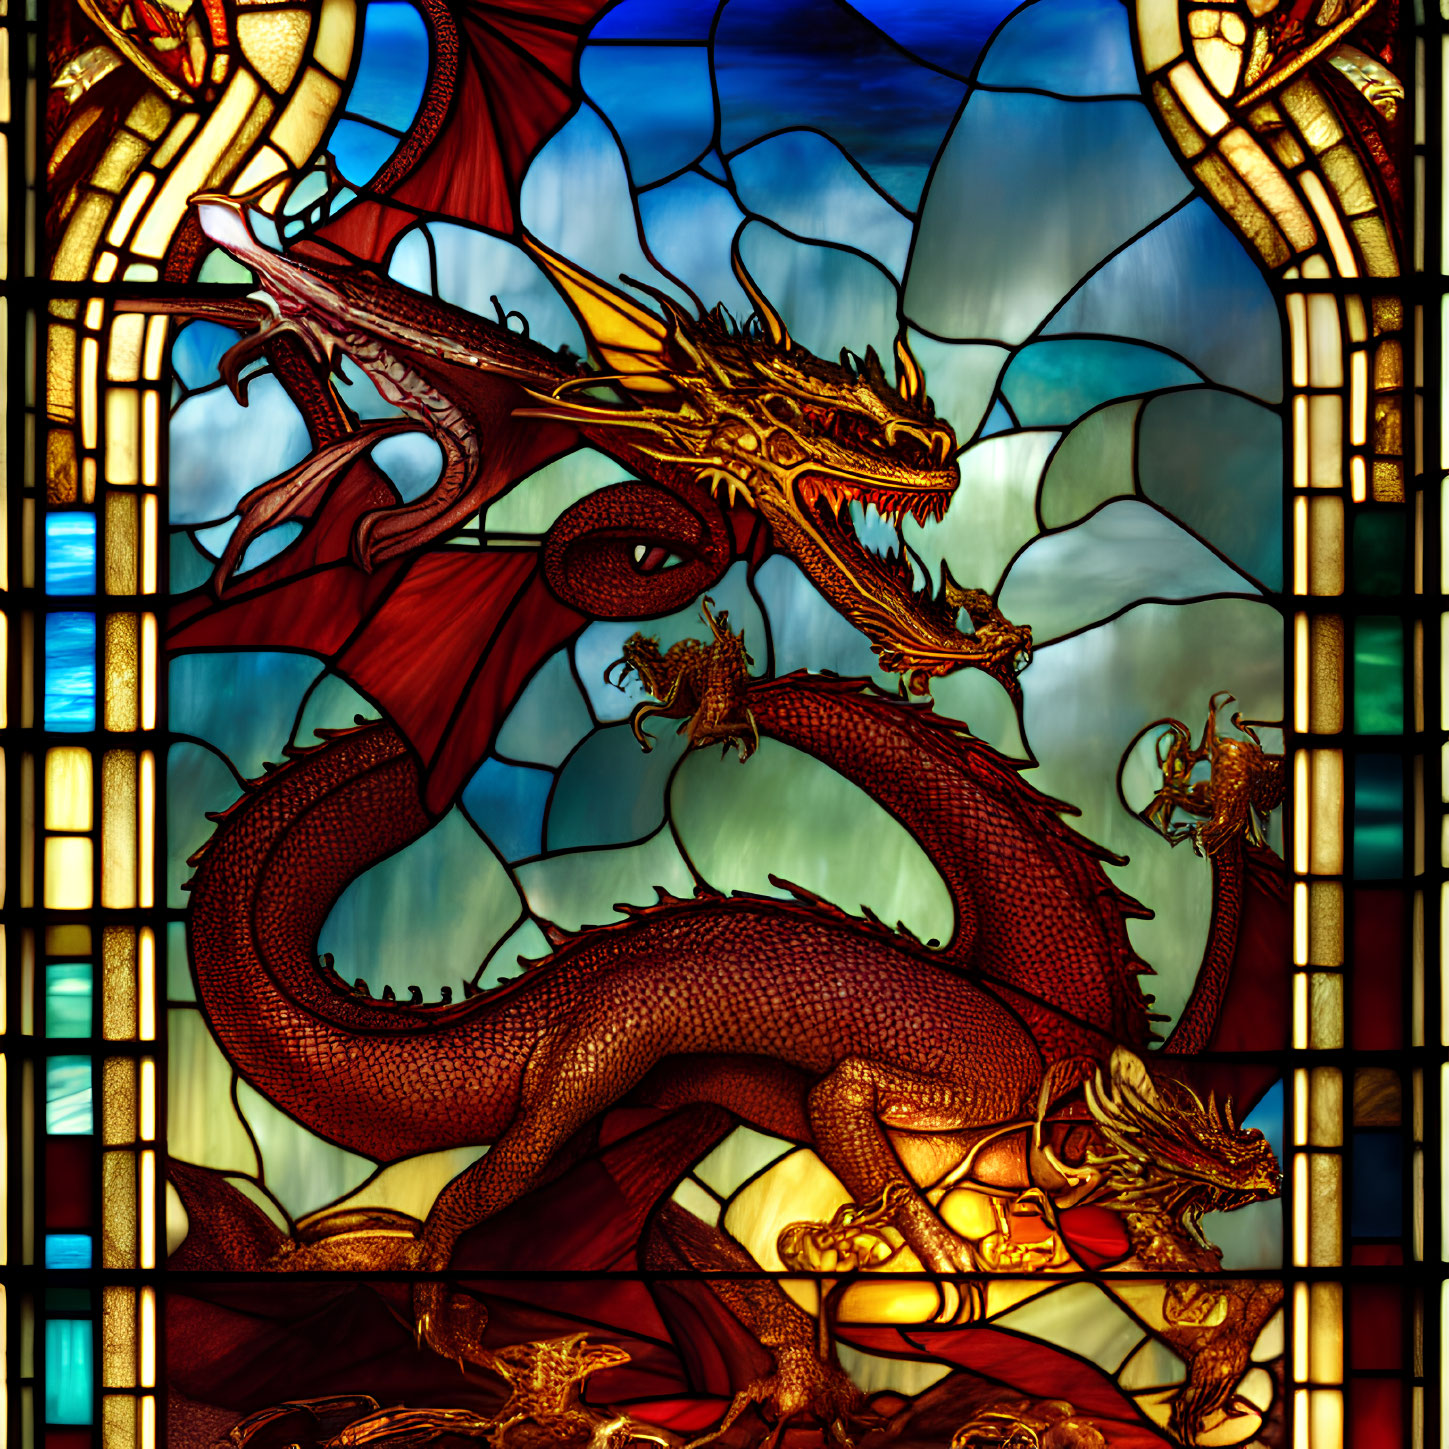 Multi-headed dragon stained glass window in red and gold hues on deep blue sky backdrop